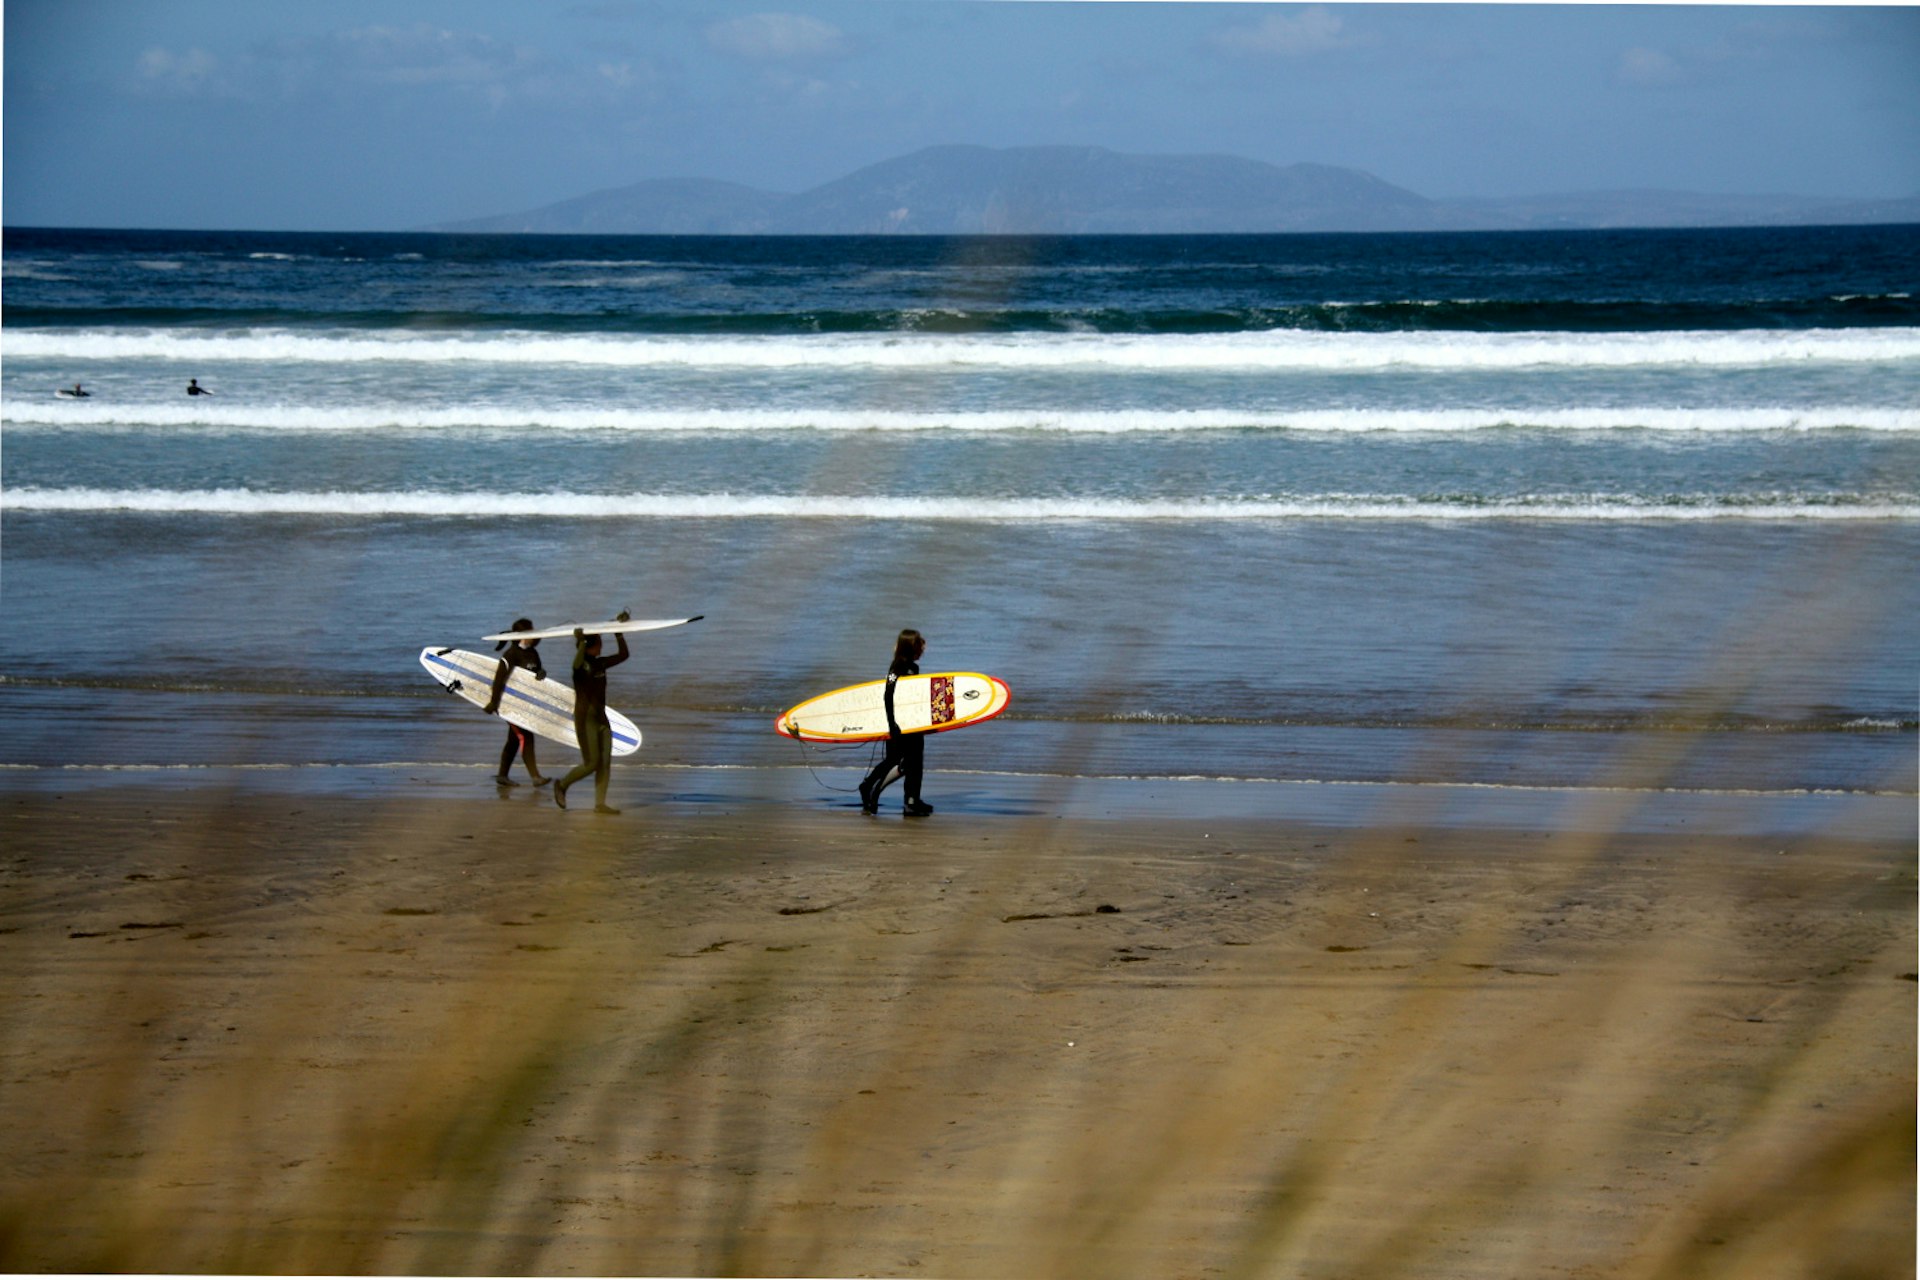 Surfers at Streedagh. Image by Aoife Ni Mhathuna / CC BY 2.0